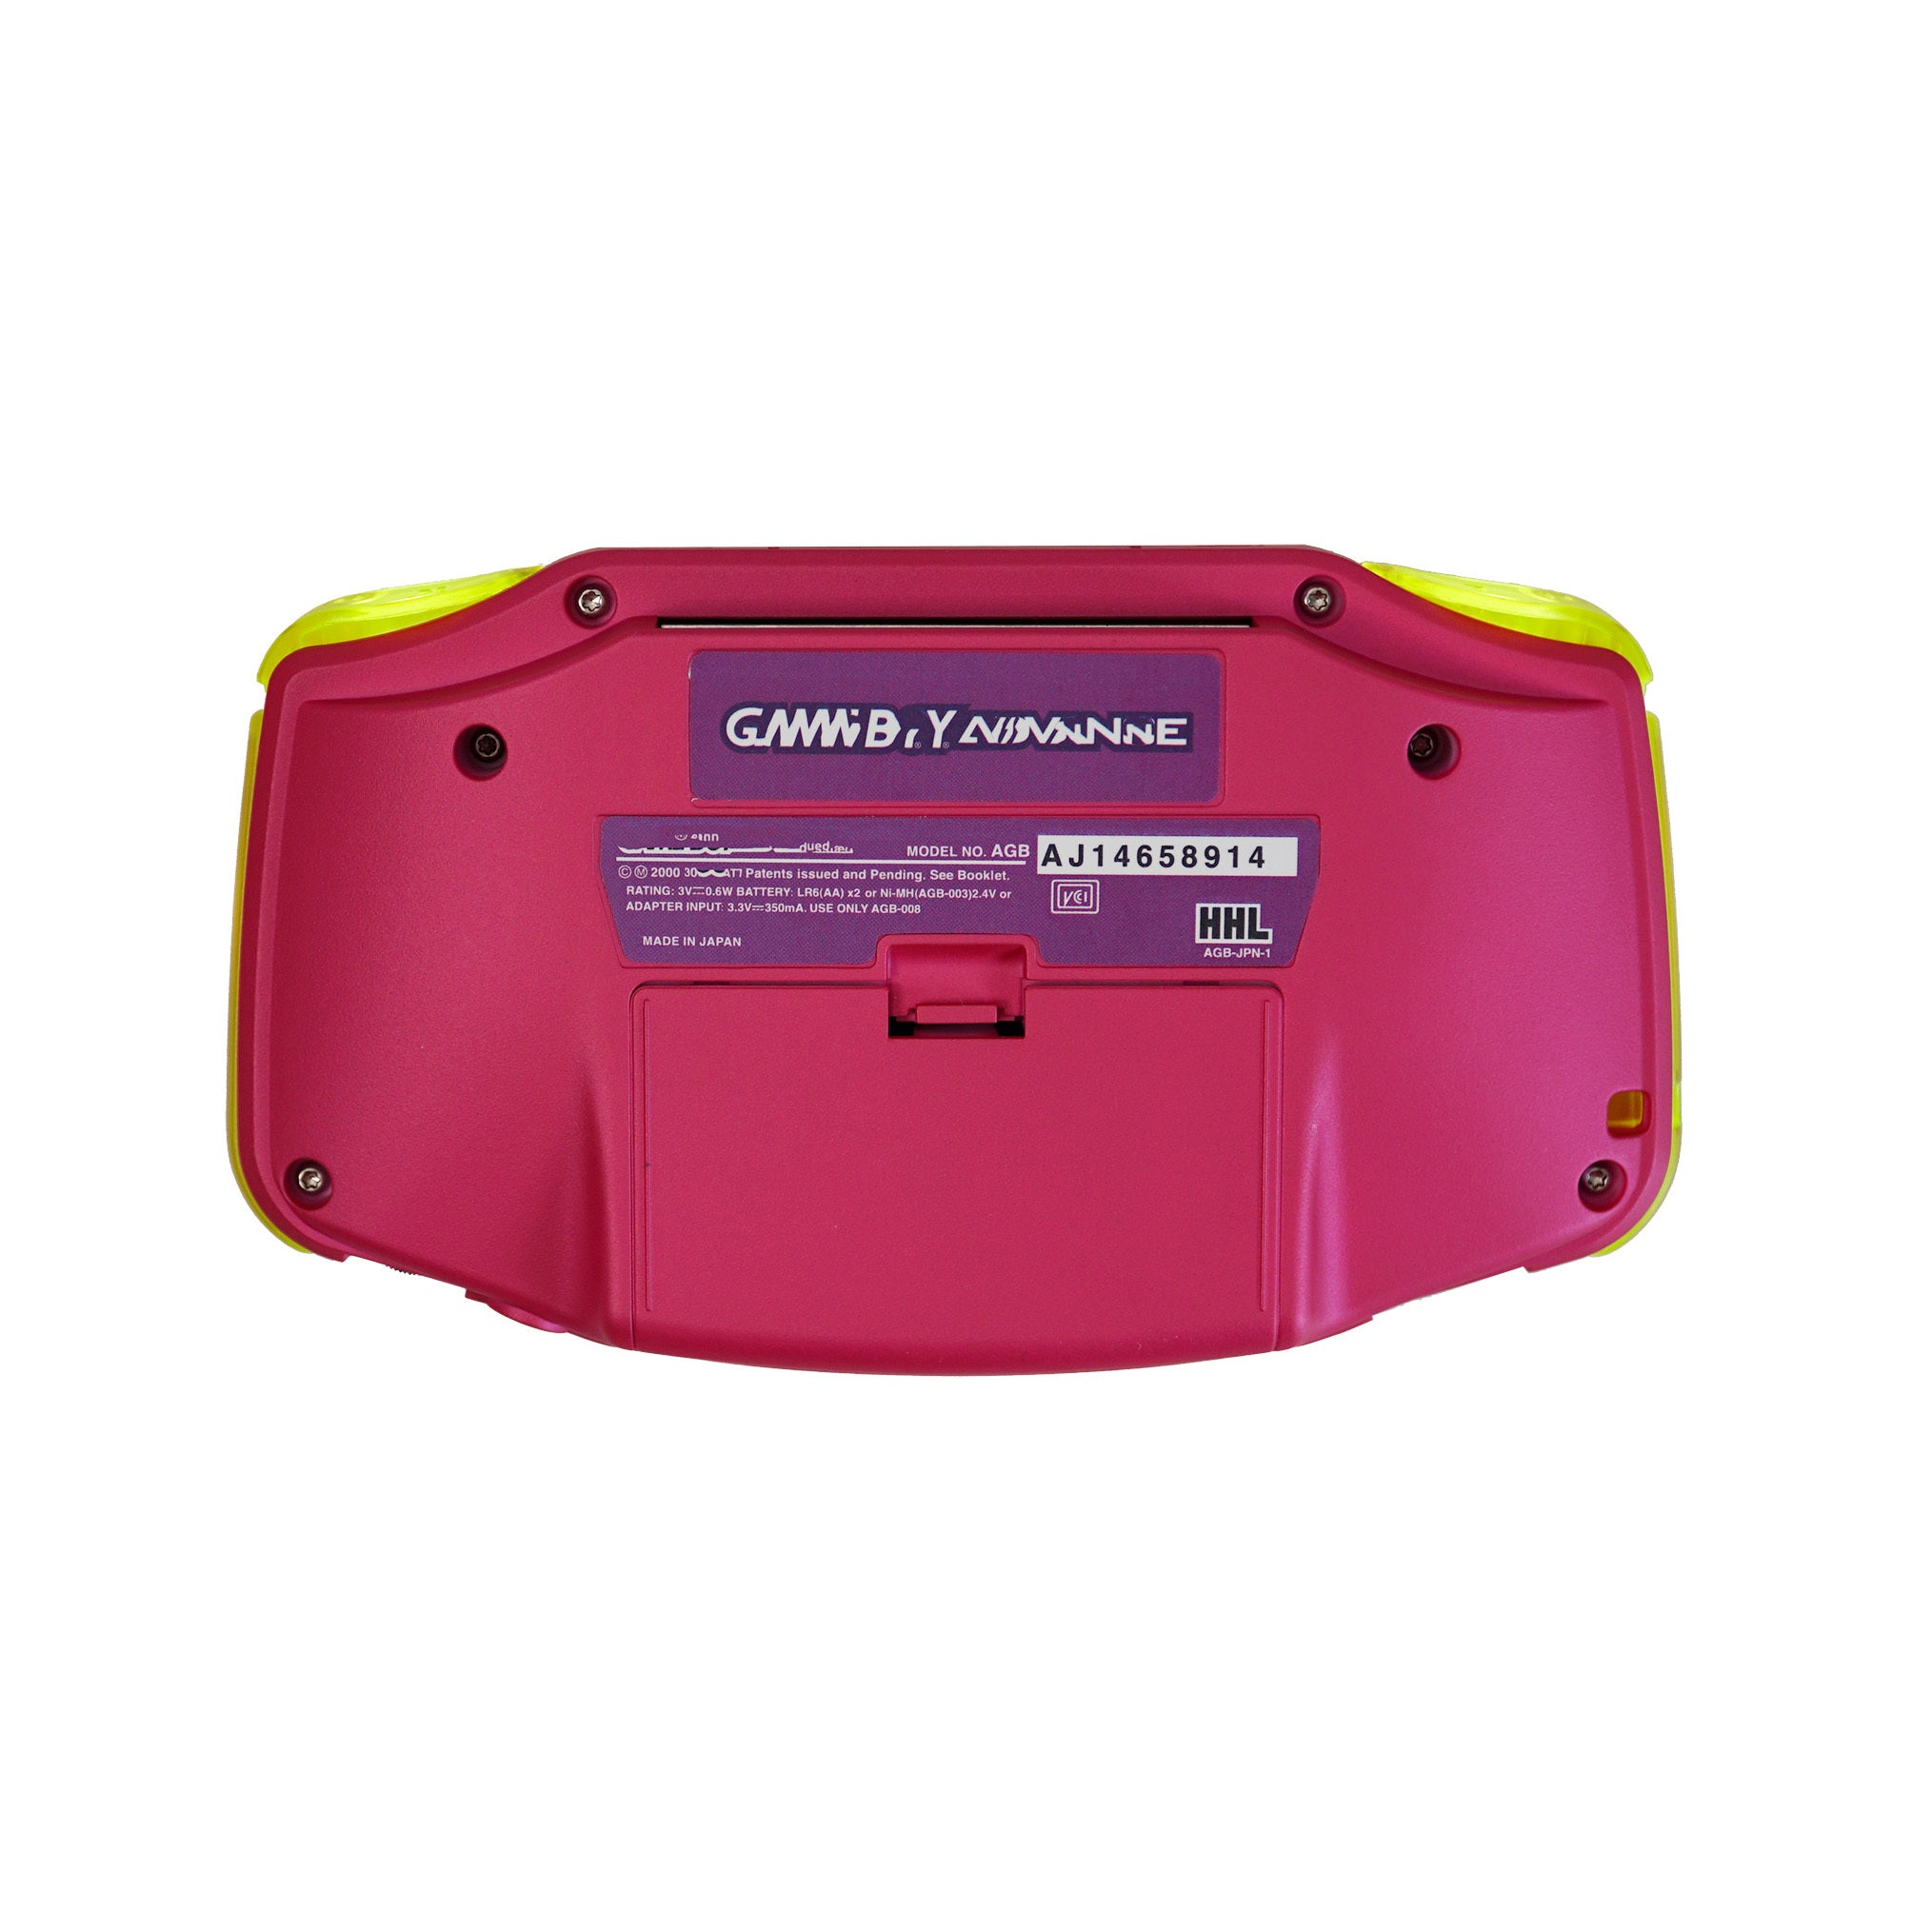 Made to Order Game Boy Advance Ultimate Console - 91' Spark Skate | IPS & LED UPGRADE ONLY Hand Held Legend